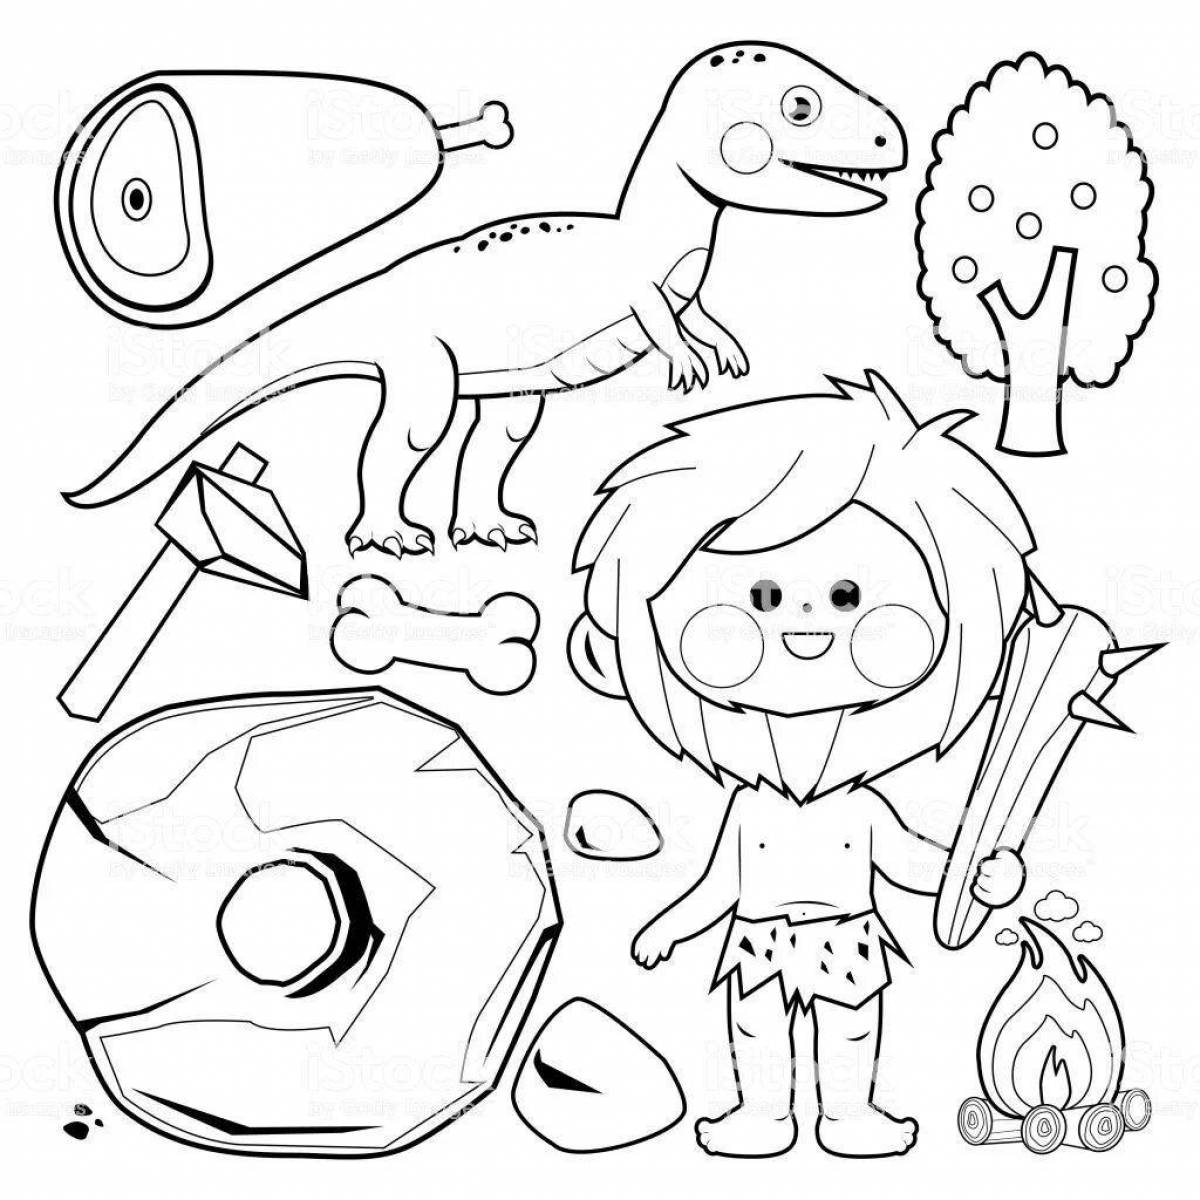 Humorous coloring pages of prehistoric professions